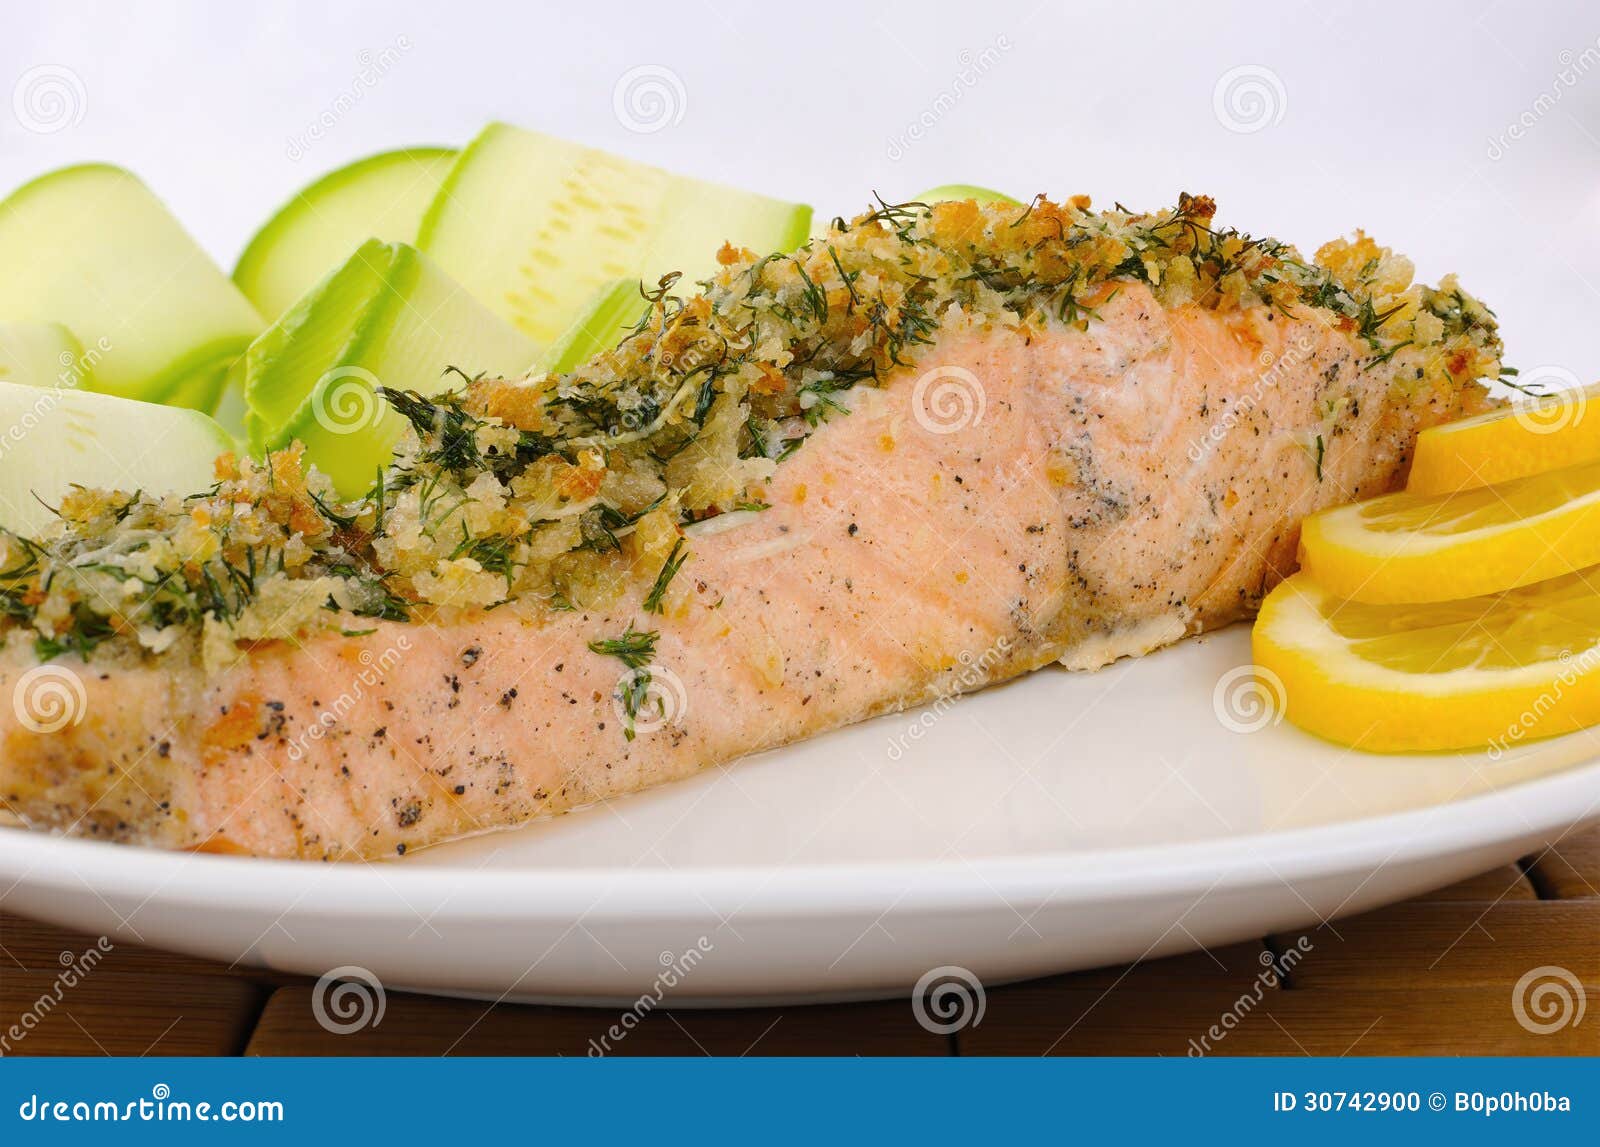 Baked Salmon with a Spicy Crust Stock Photo - Image of calories, lunch ...